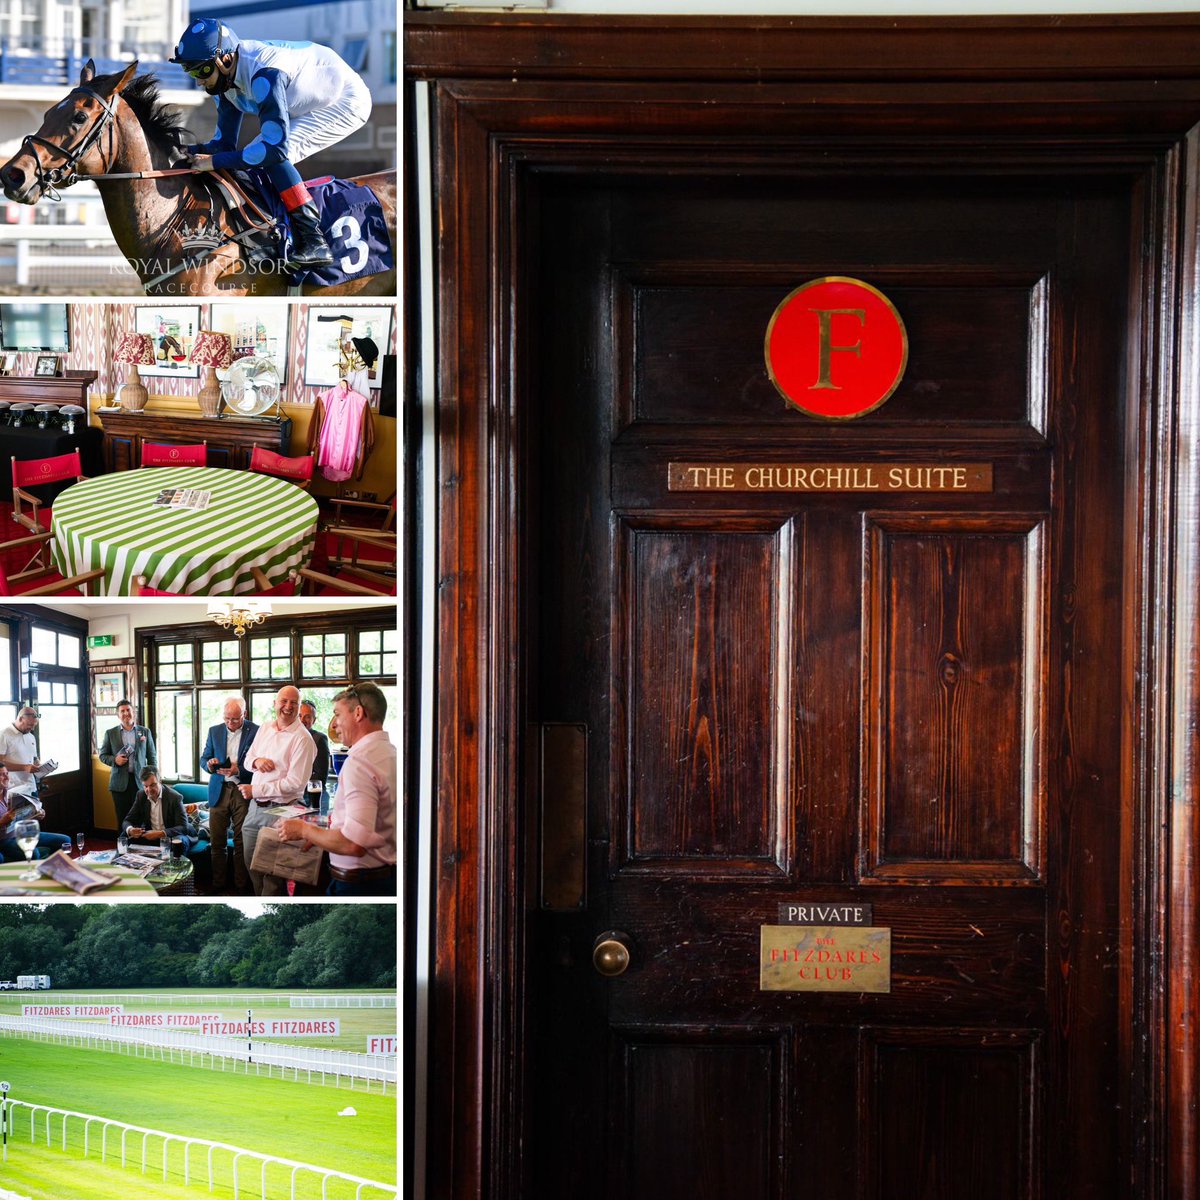 Open the DOOR! A new opportunity to come racing with us and our partners @Fitzdares at Windsor Races in the famous ‘Winston Churchill’ Box includes - Entrance to ‘Irish Night’ on 10 June - Food/Drinks - Free Bet - Great Racing Contact steve@eclipsesports.co.uk for details